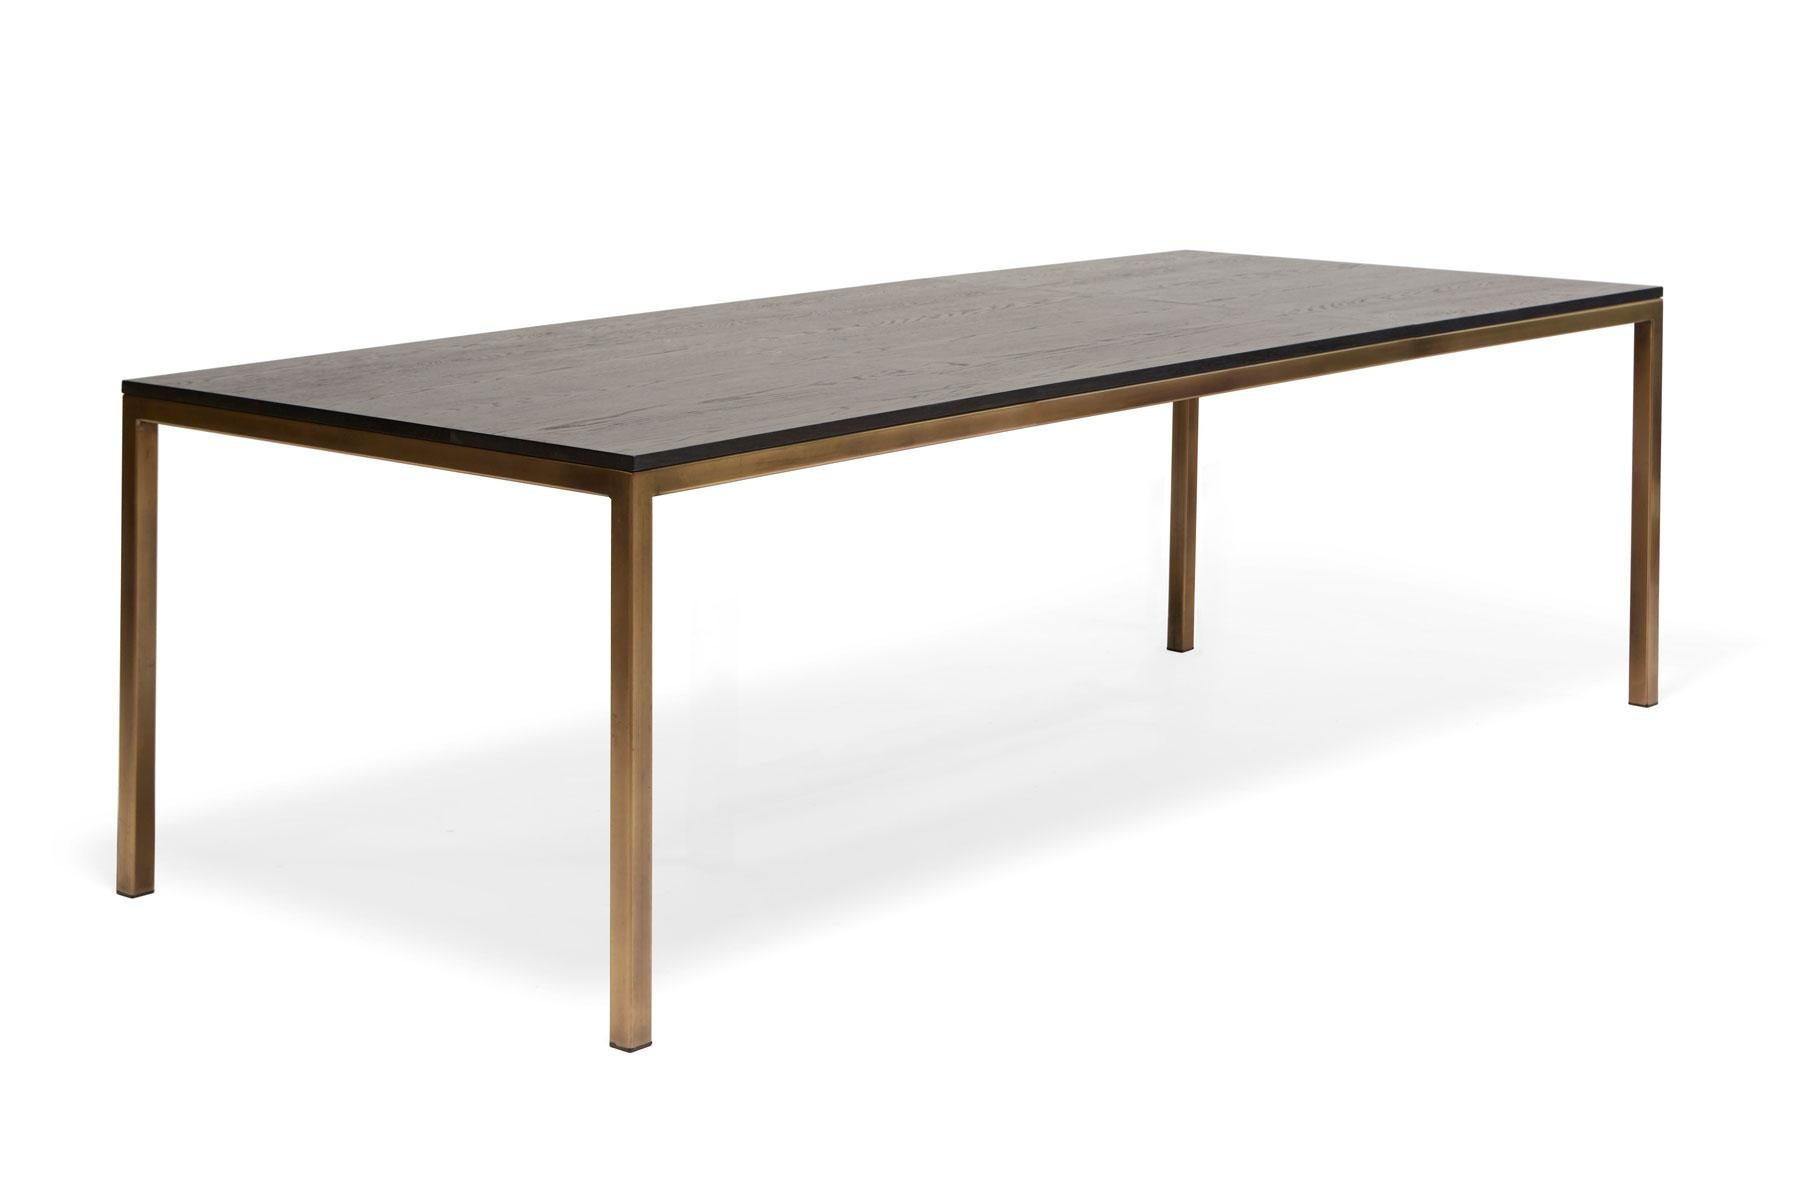 A solid oak and steel dining table, perfect for seating 6-10 people comfortably. This version has an antique brass frame finish and an ebonized oak tabletop. White oak, walnut, or maple wood top and various frame finish options are also available.